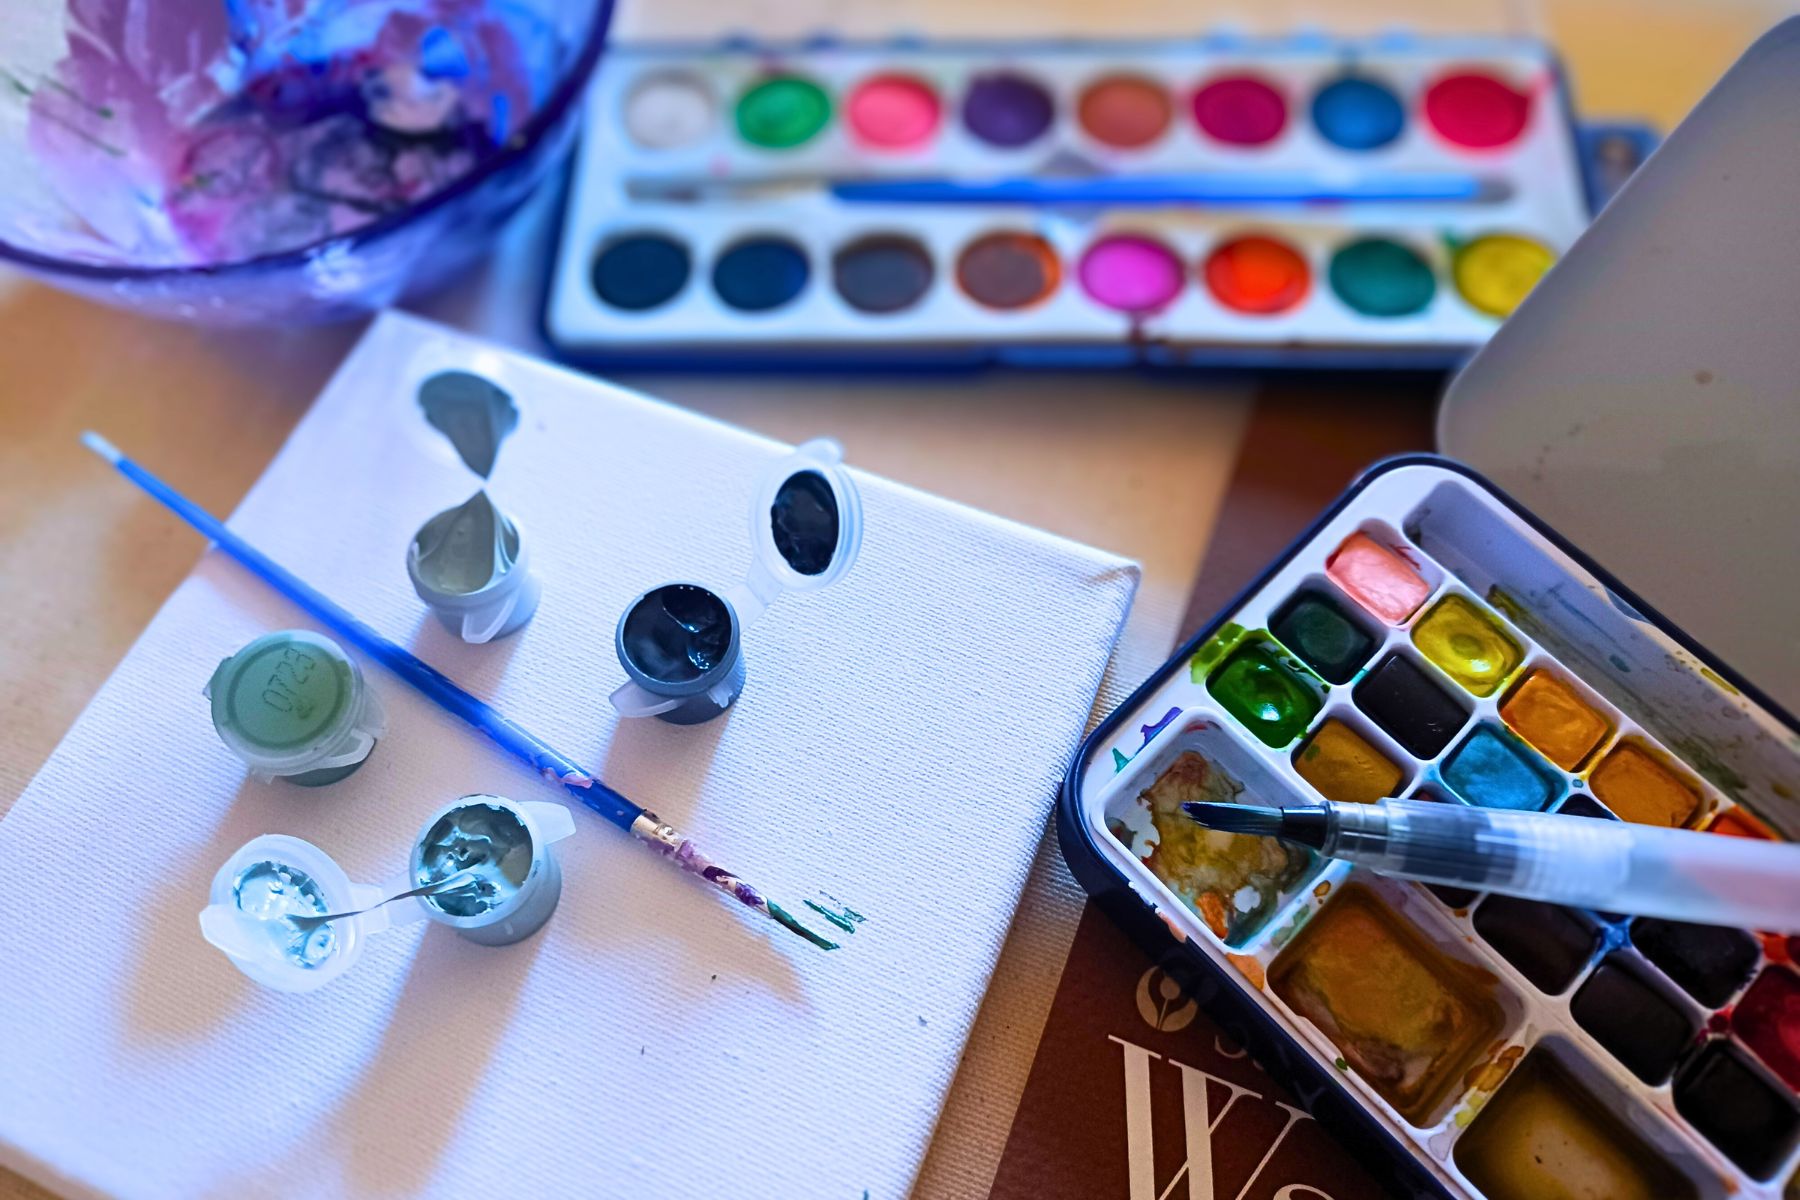 Watercolor vs acrylic: A quick guide for beginners